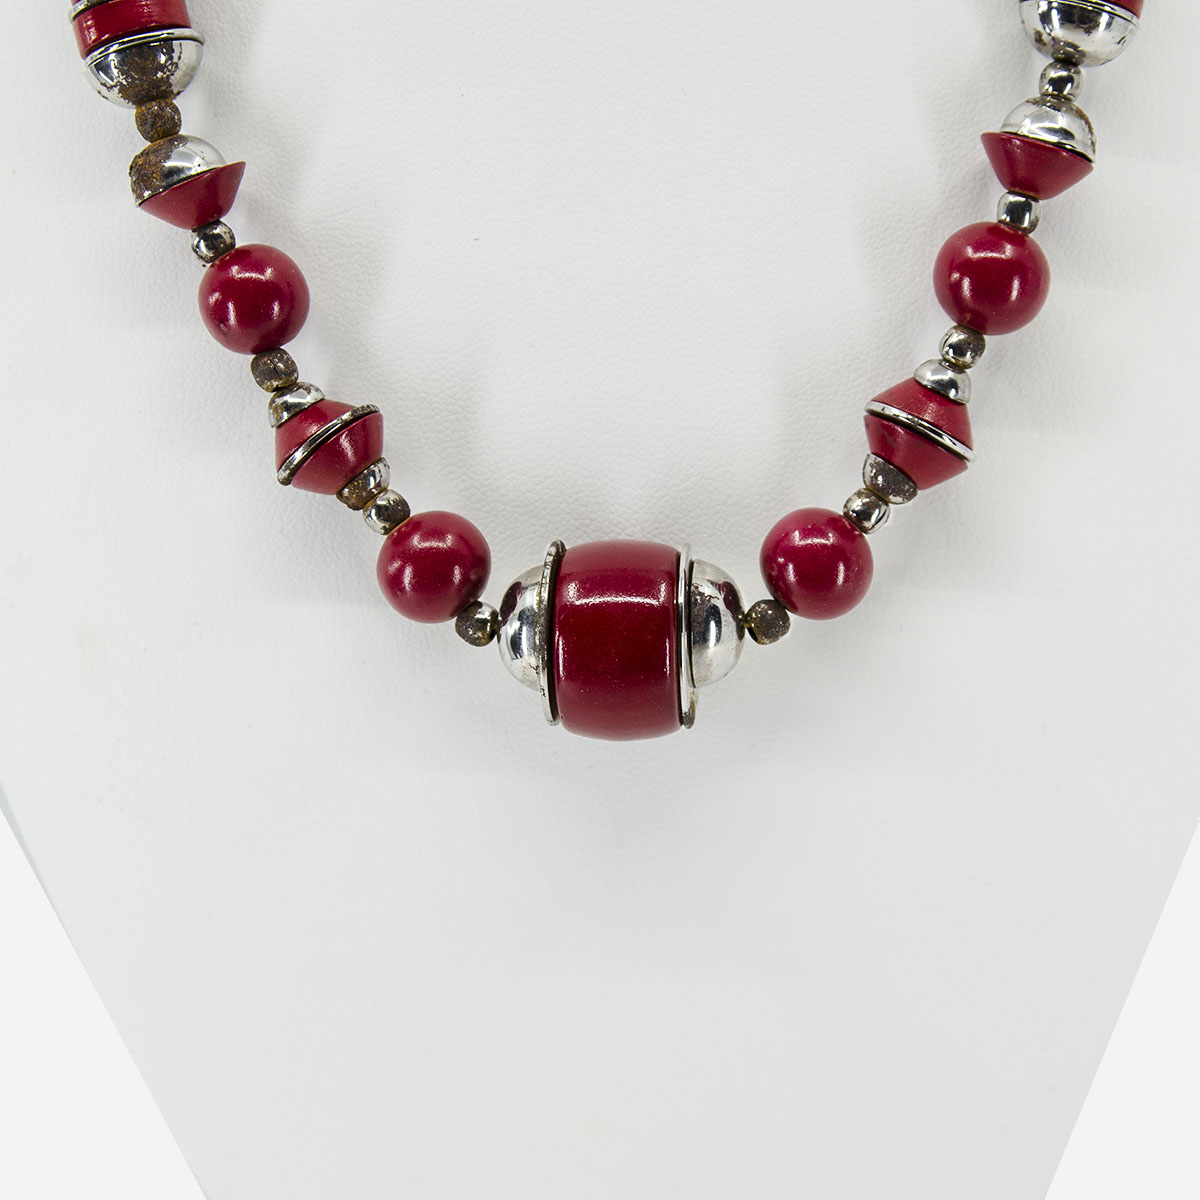 red bead necklace